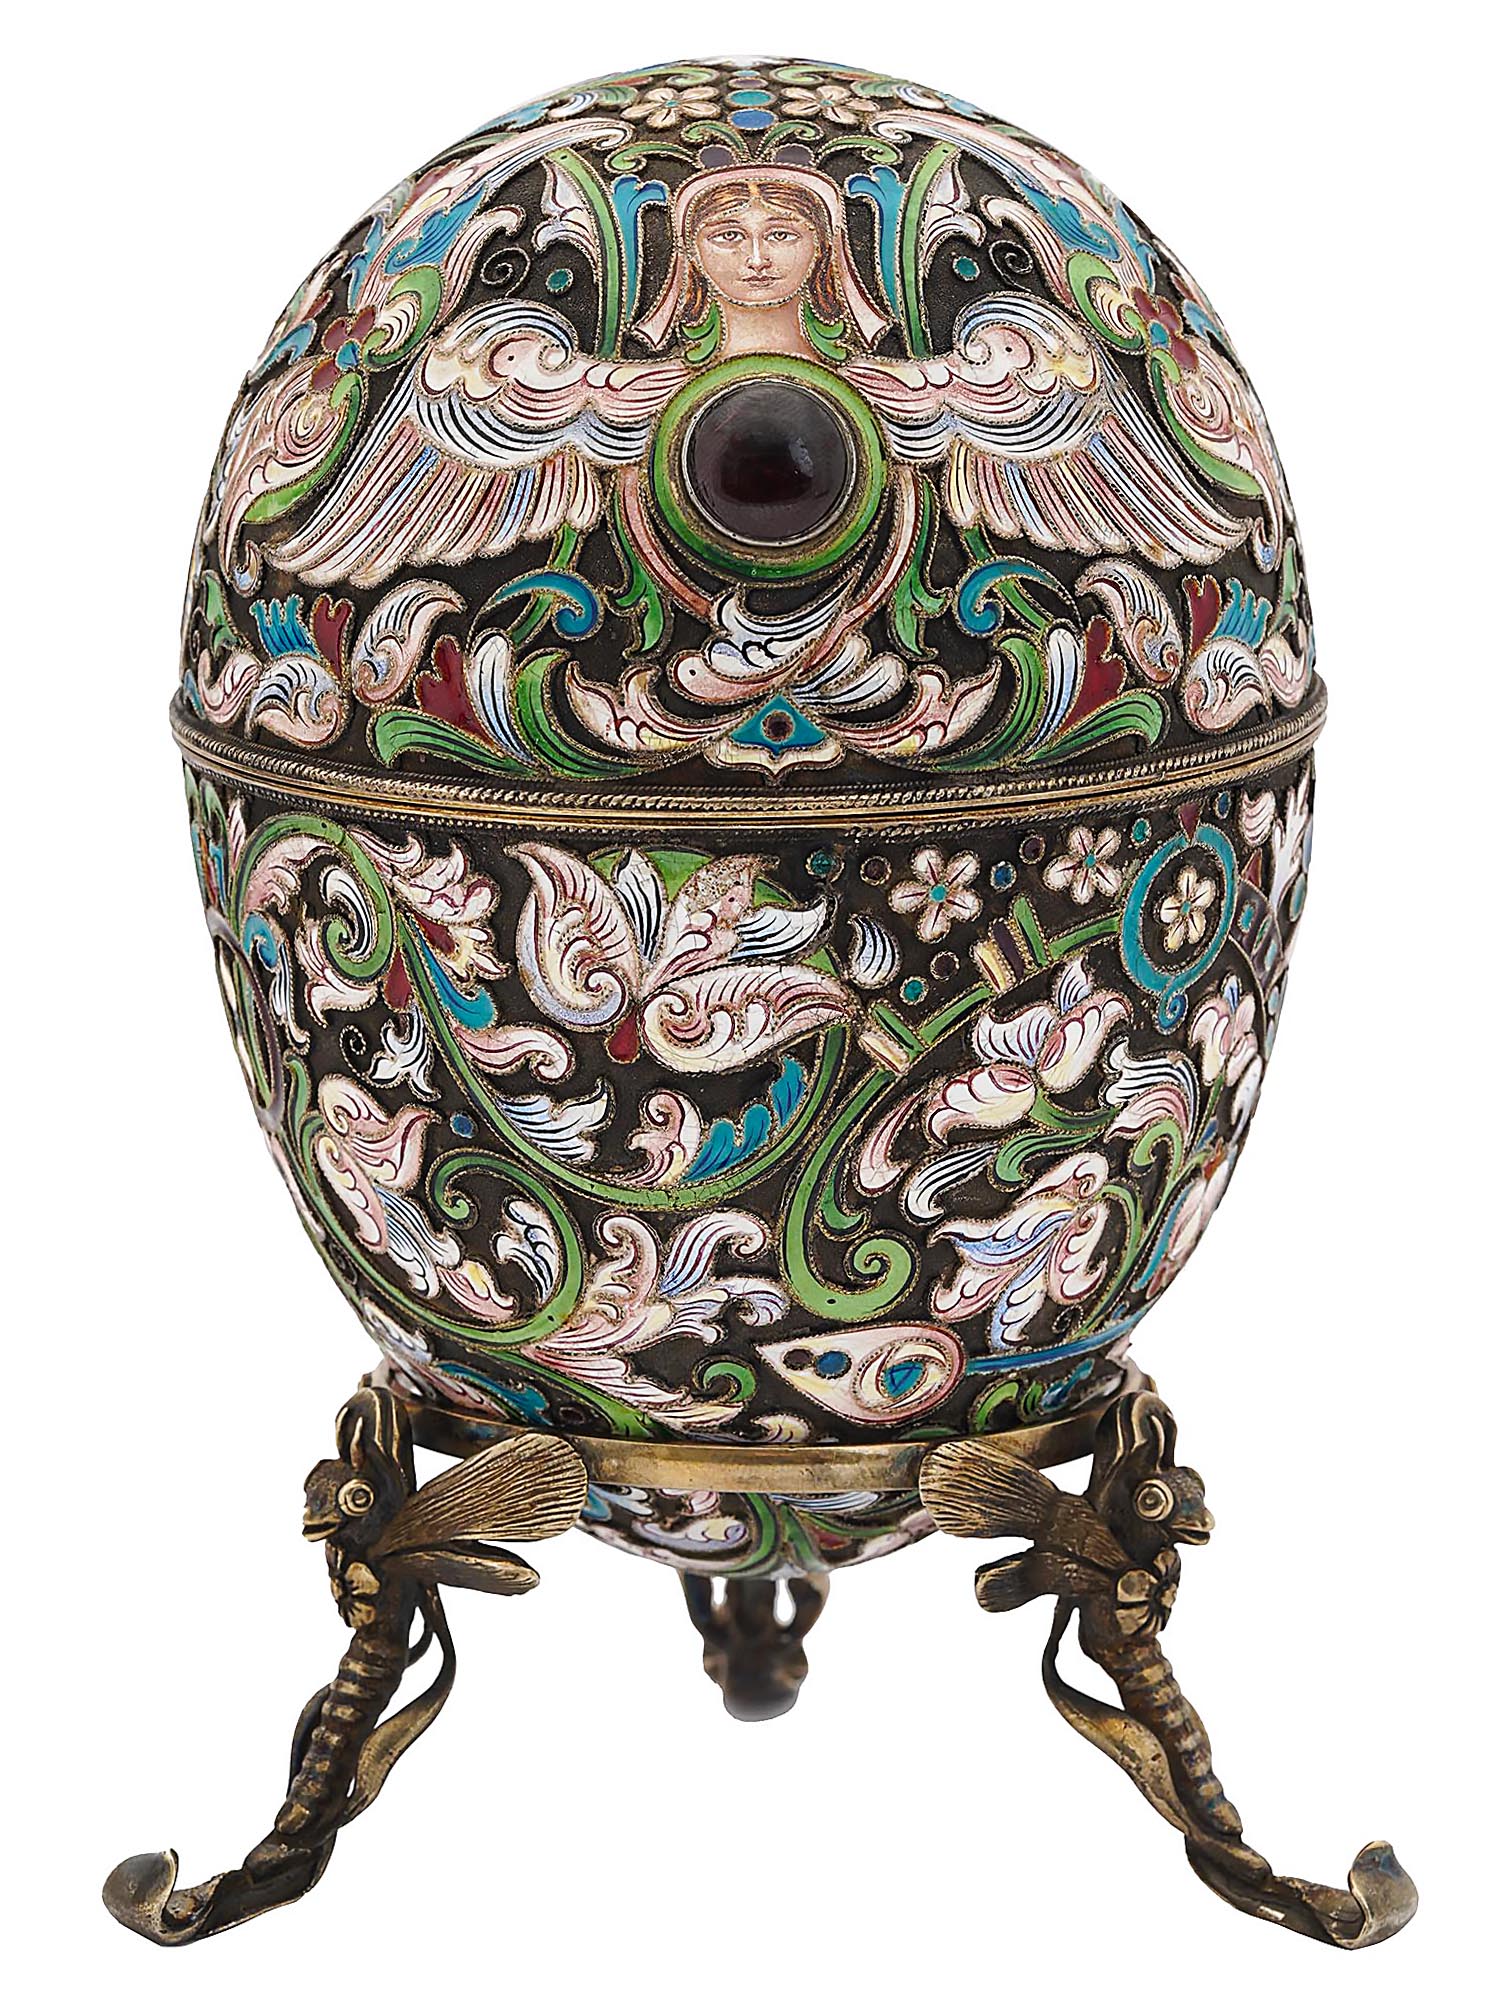 LARGE RUSSIAN SILVER CLOISONNE ENAMEL EGG W STAND PIC-0